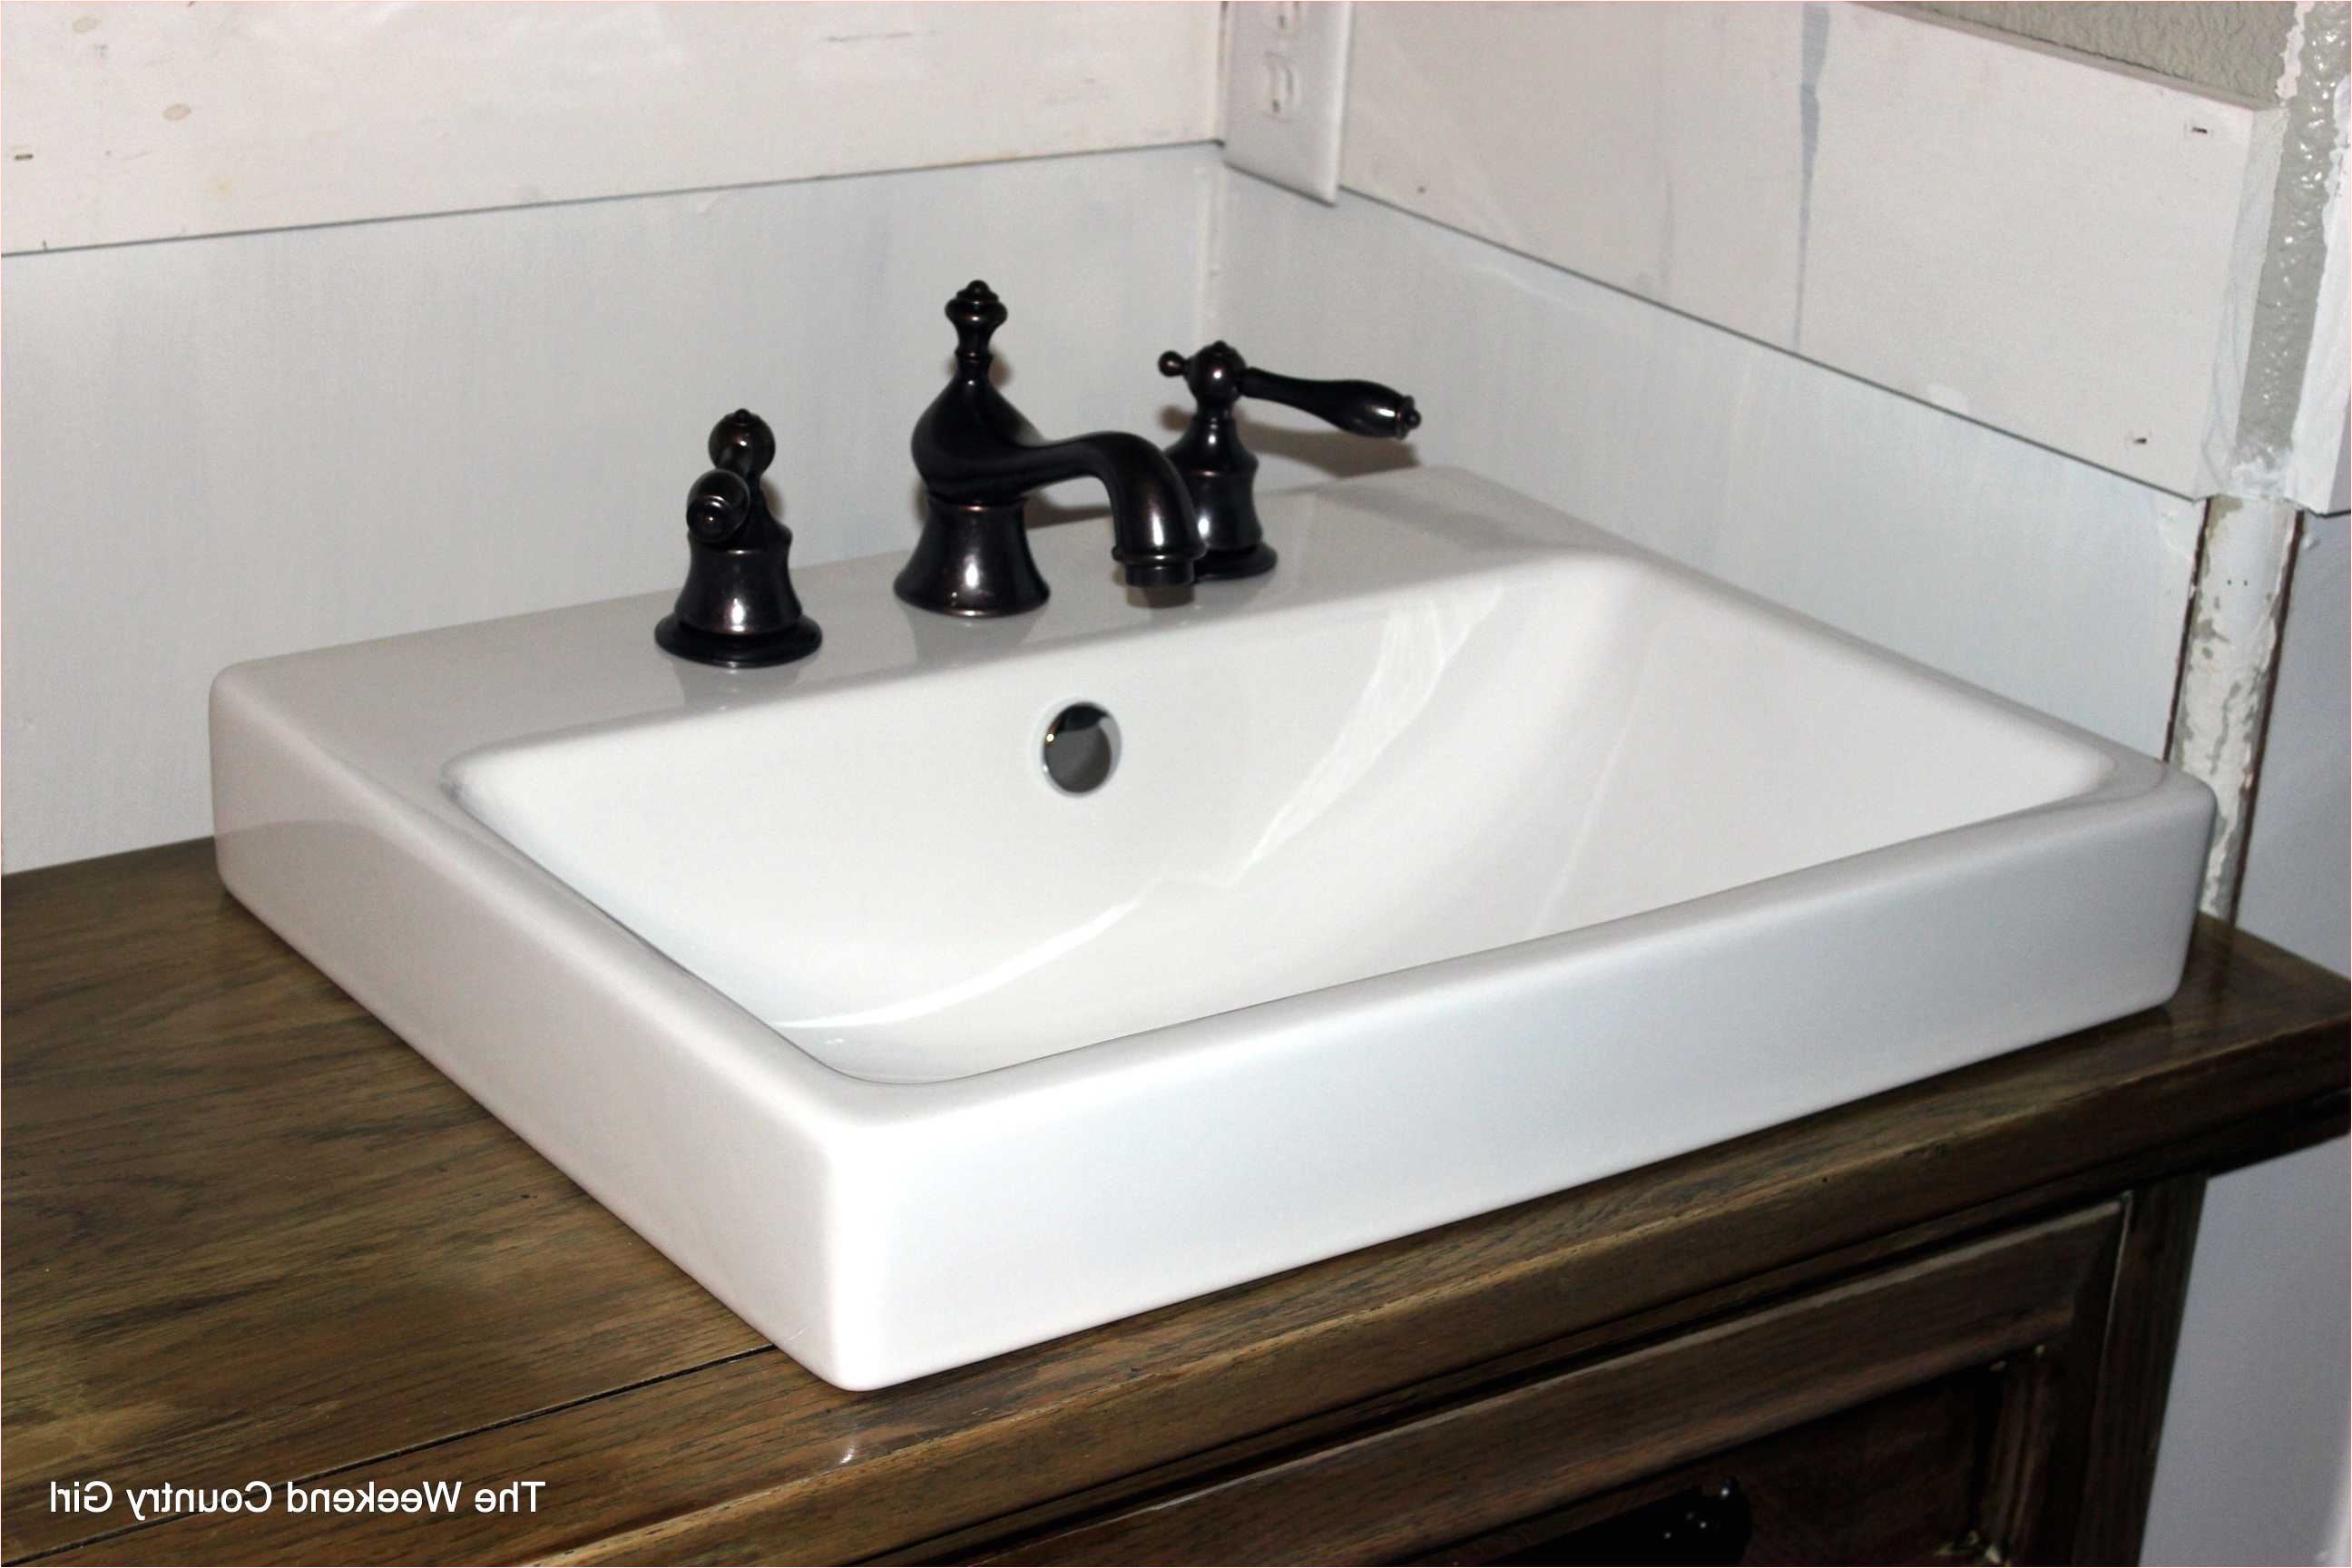 bathtub images with price new drop in bathtub best of selecting bathroom sinksh sink prices i 0dbathtub images with price the best of drop in bathtub best